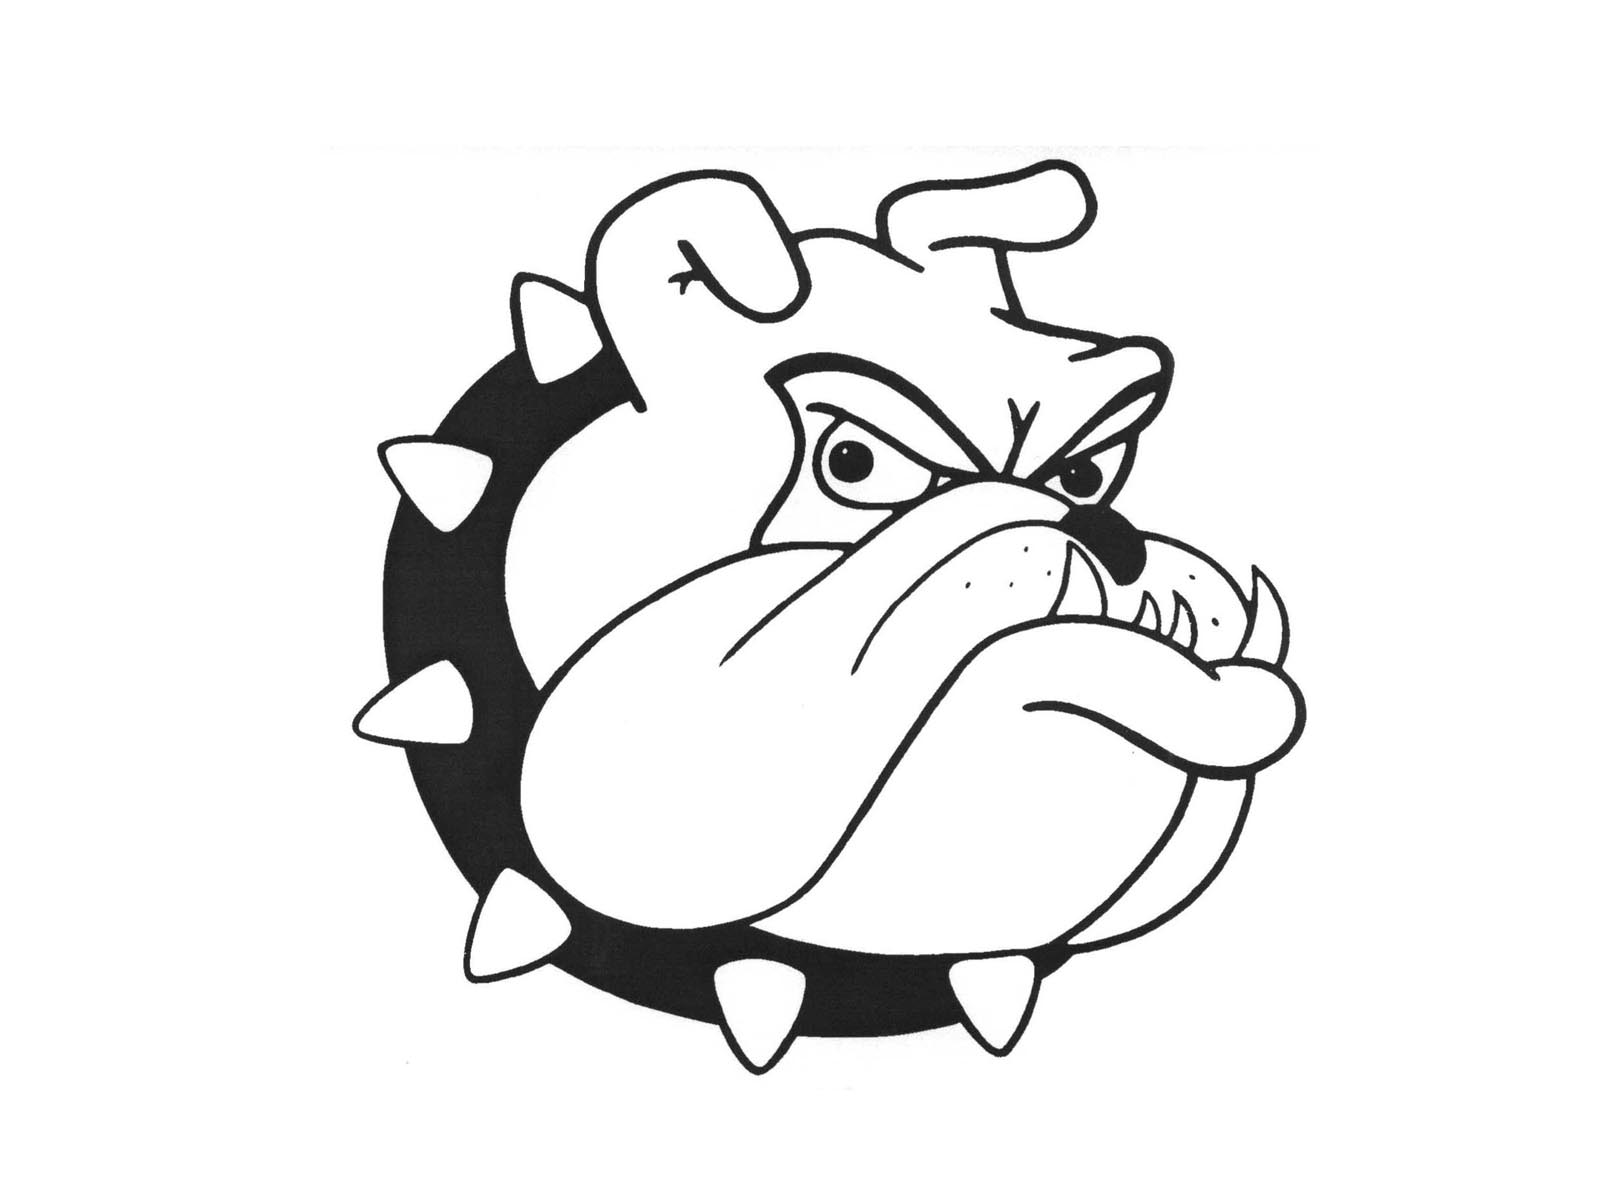 Free Animated Bulldog Pictures, Download Free Animated Bulldog Pictures png images, Free